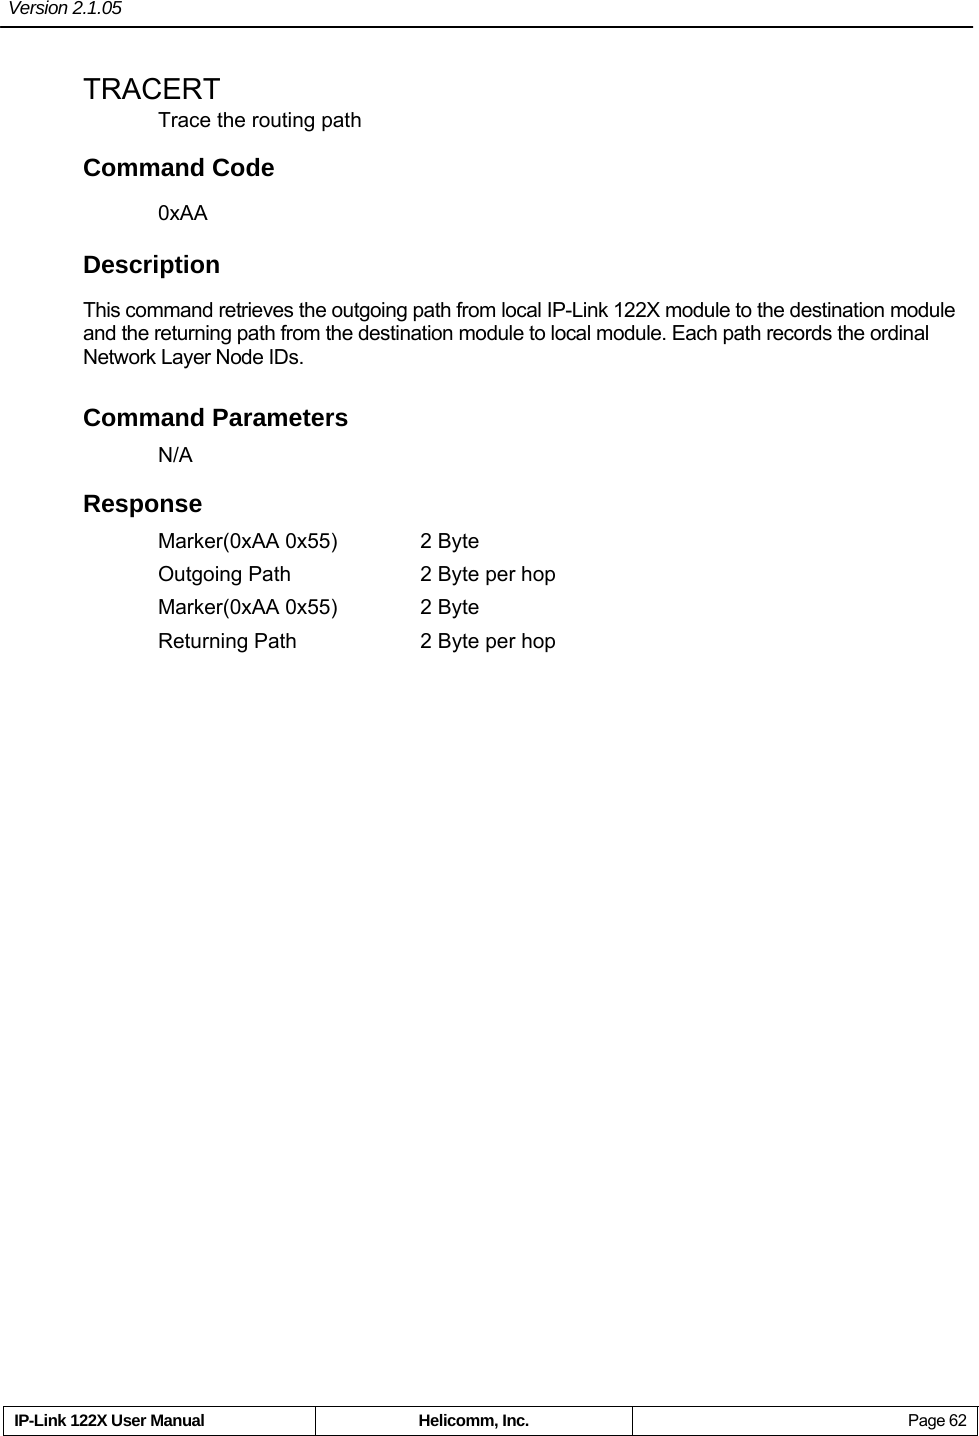 Version 2.1.05     IP-Link 122X User Manual  Helicomm, Inc.  Page 62 TRACERT Trace the routing path Command Code 0xAA Description This command retrieves the outgoing path from local IP-Link 122X module to the destination module and the returning path from the destination module to local module. Each path records the ordinal Network Layer Node IDs. Command Parameters N/A Response Marker(0xAA 0x55)  2 Byte Outgoing Path  2 Byte per hop Marker(0xAA 0x55)  2 Byte Returning Path  2 Byte per hop  